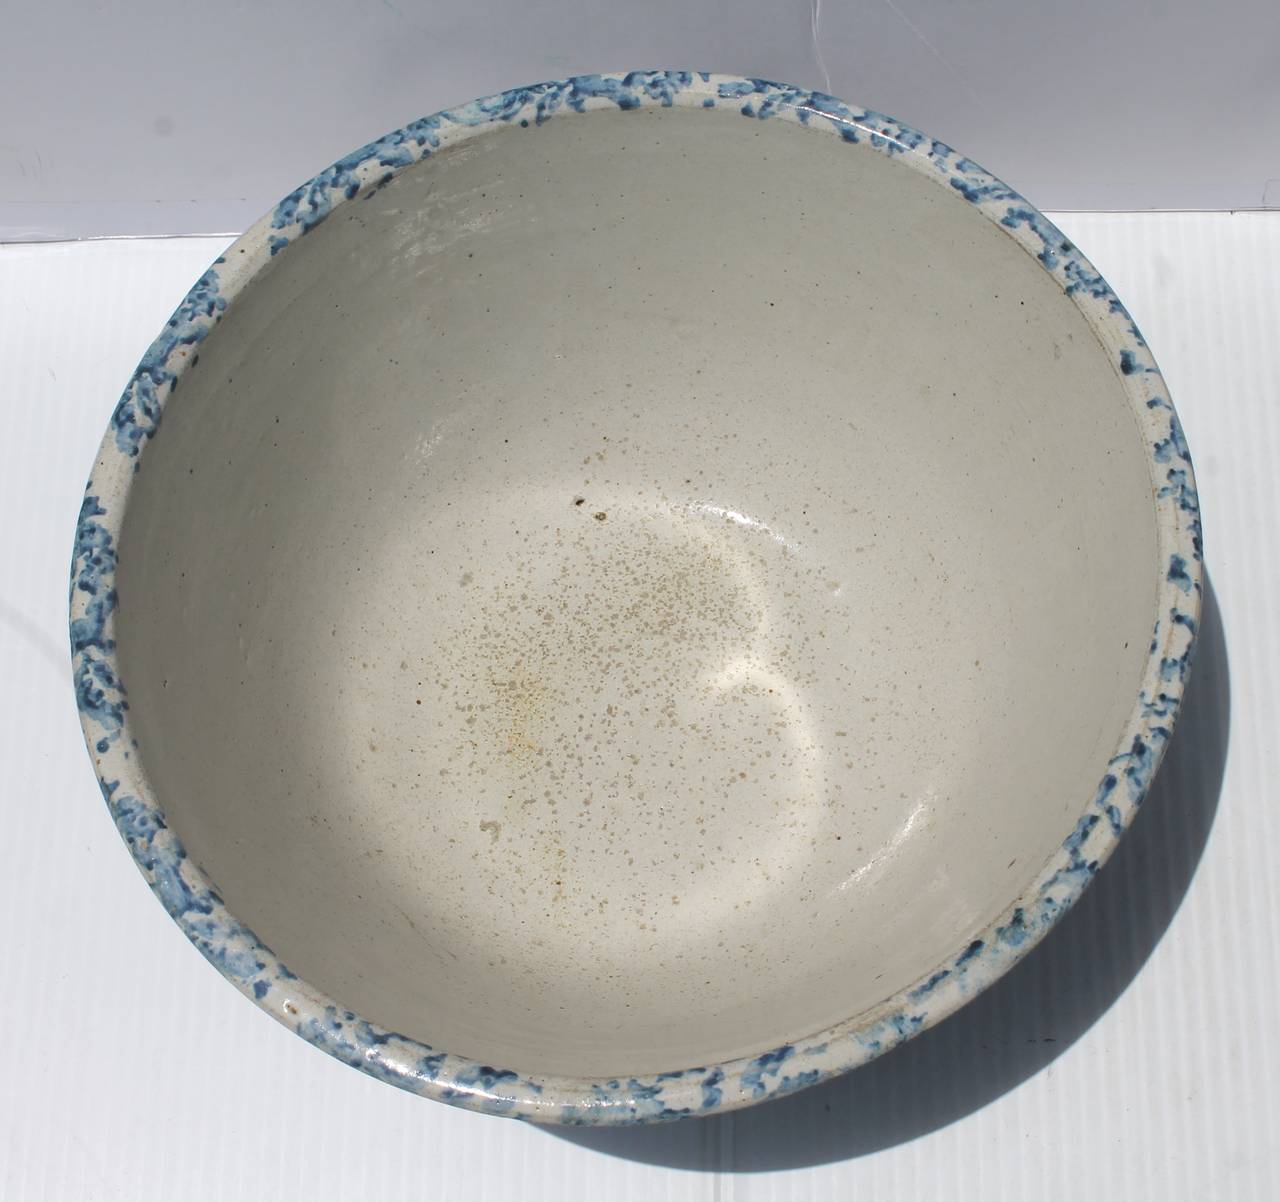 19th century large design sponge ware mixing or large serving bowl. This bowl is in pristine condition. Great serving bowl for fruit or fruit salad.